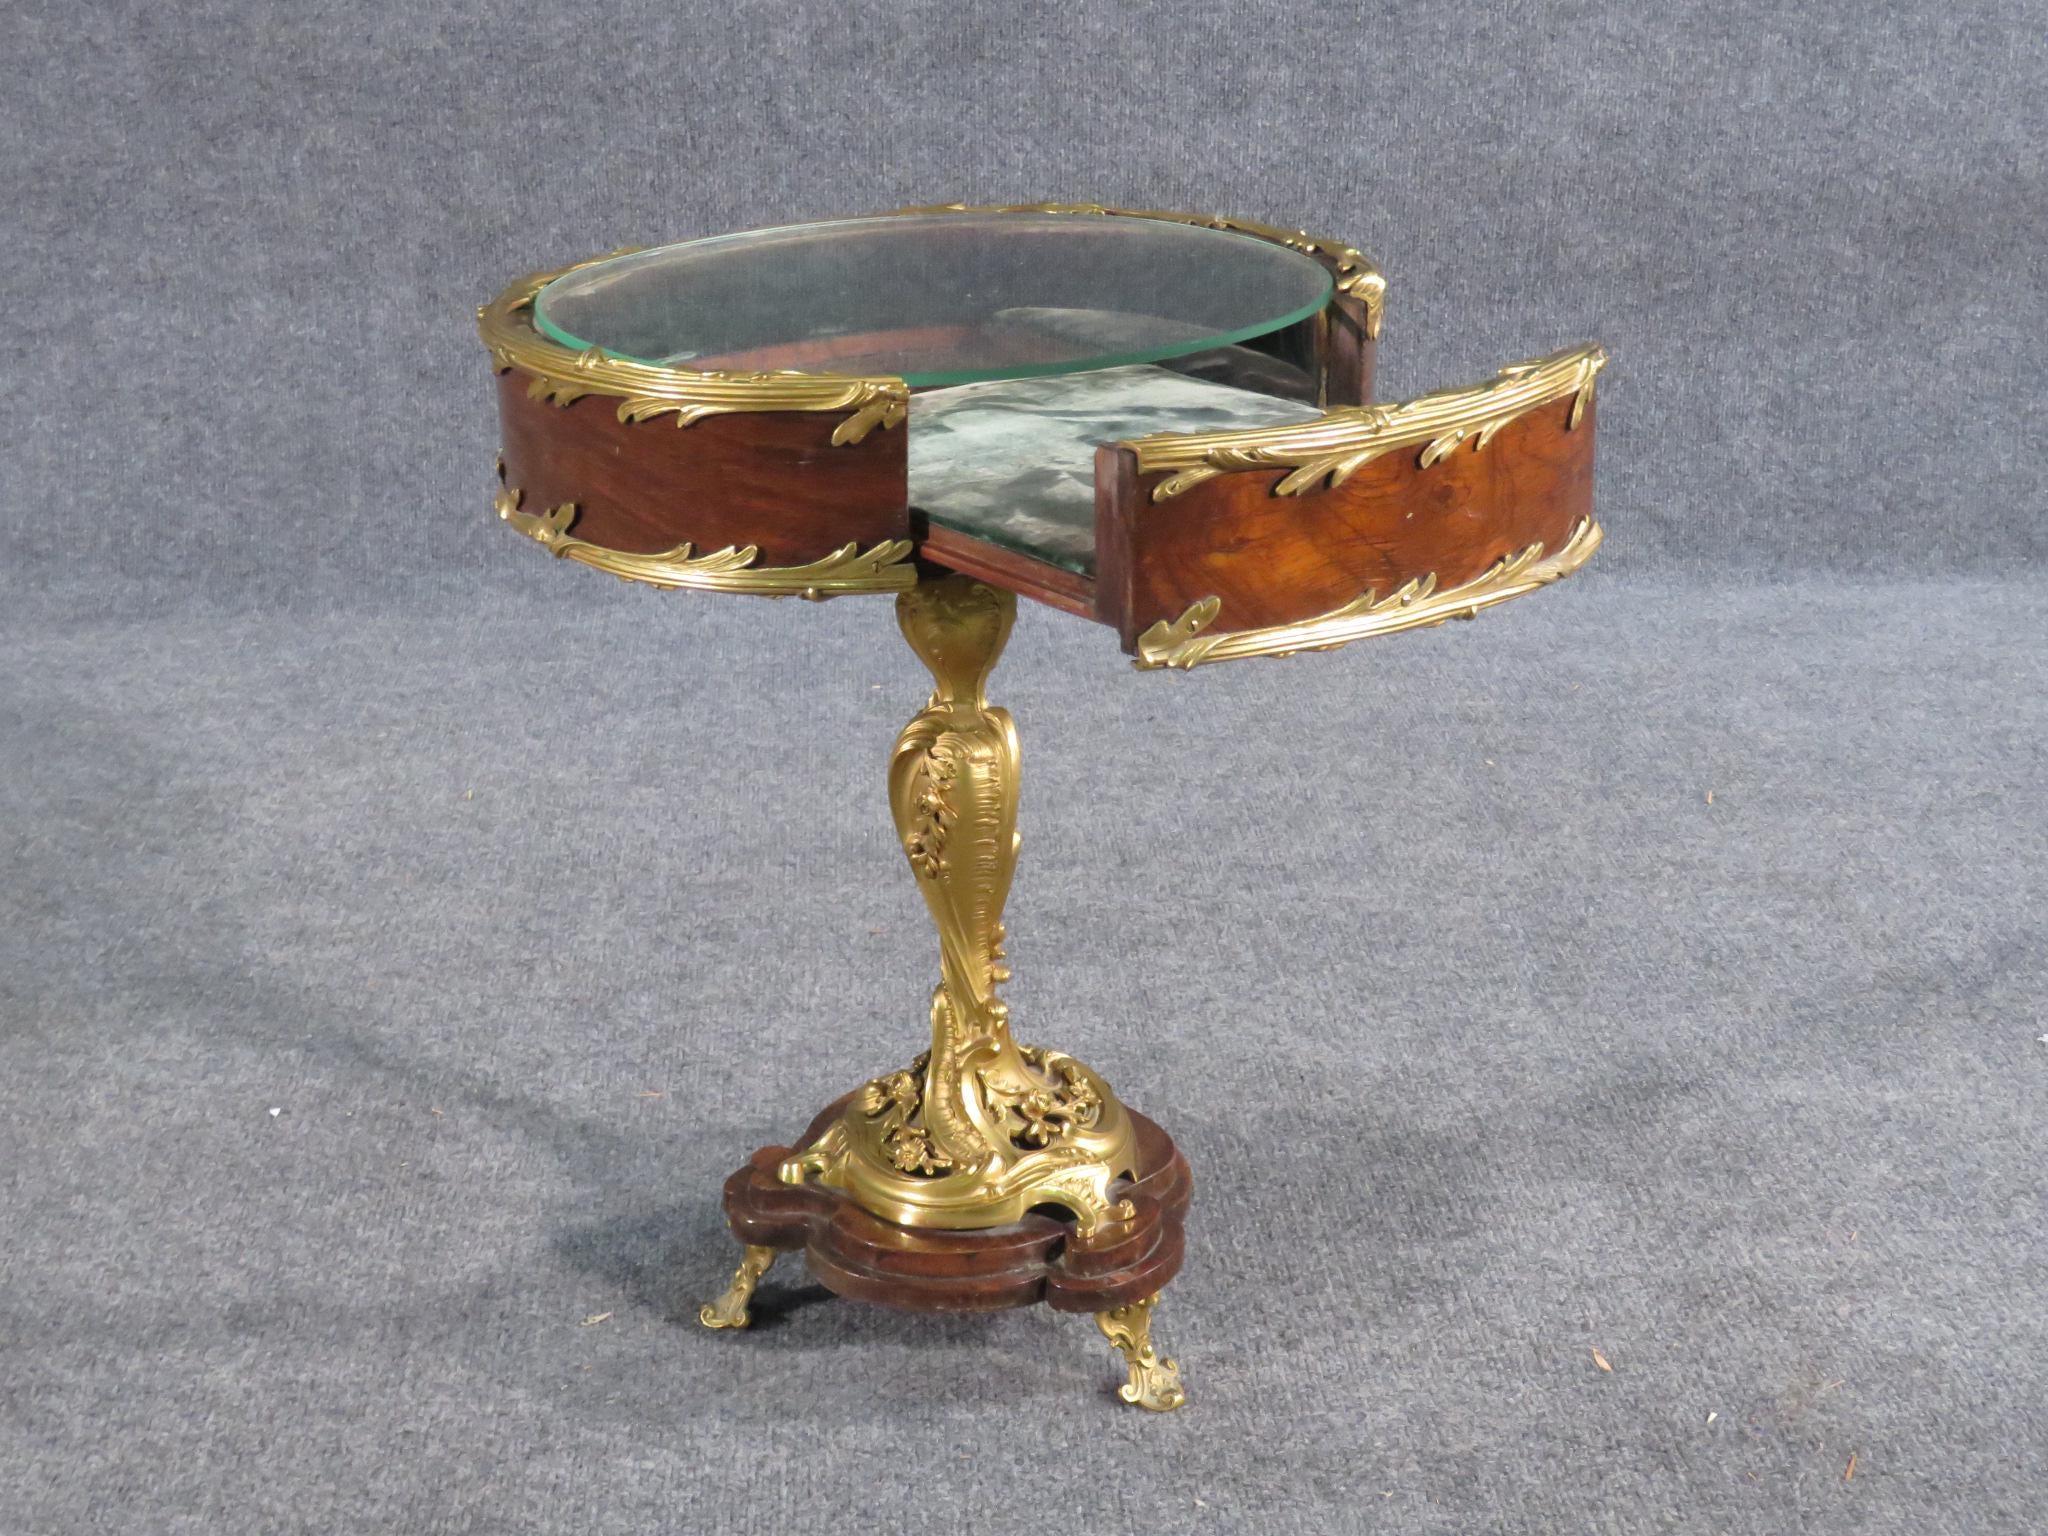 This is a spectacular piece. The finest possible bronze casting and the most unique design combine to produce a rare vitrine for jewelry or other unique objects. The cabinet is in very good condition and is made of mahogany, bronze and glass. It is